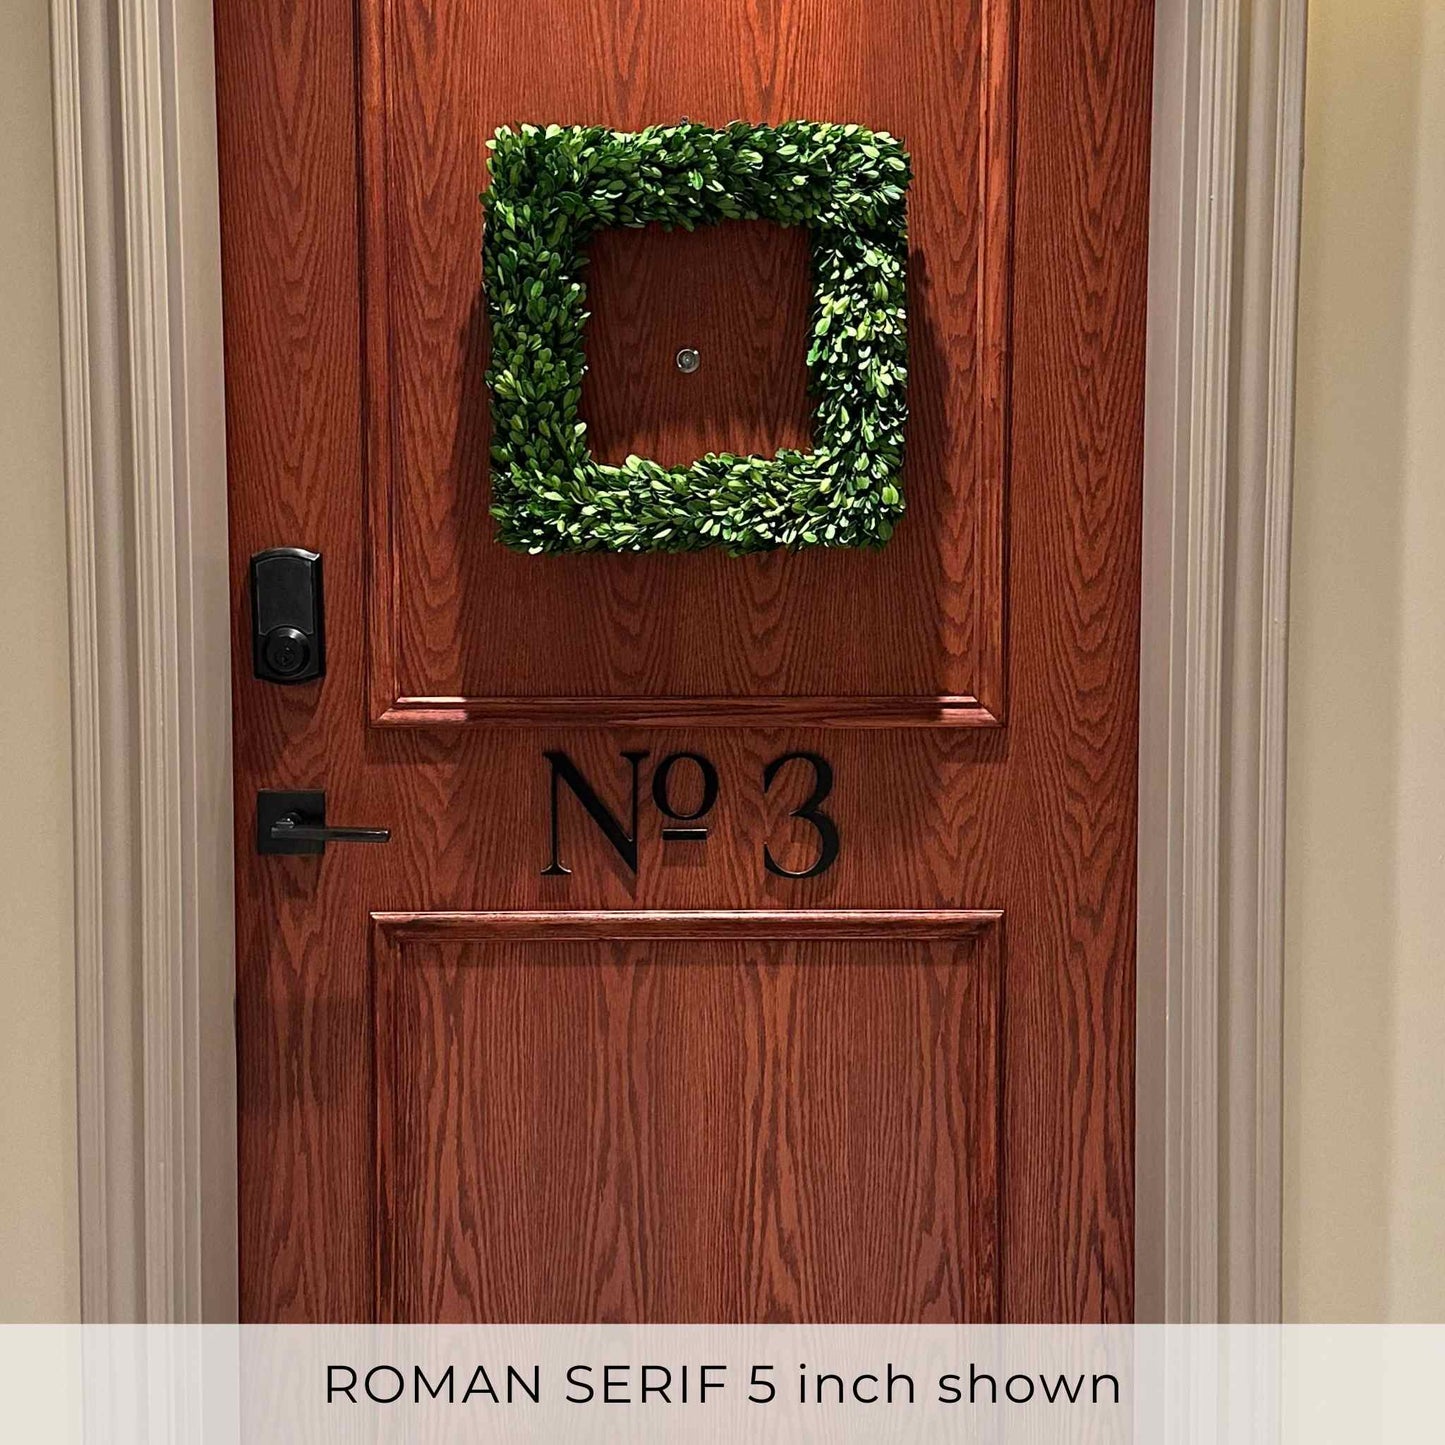 ROMAN SERIF house numbers and No letters